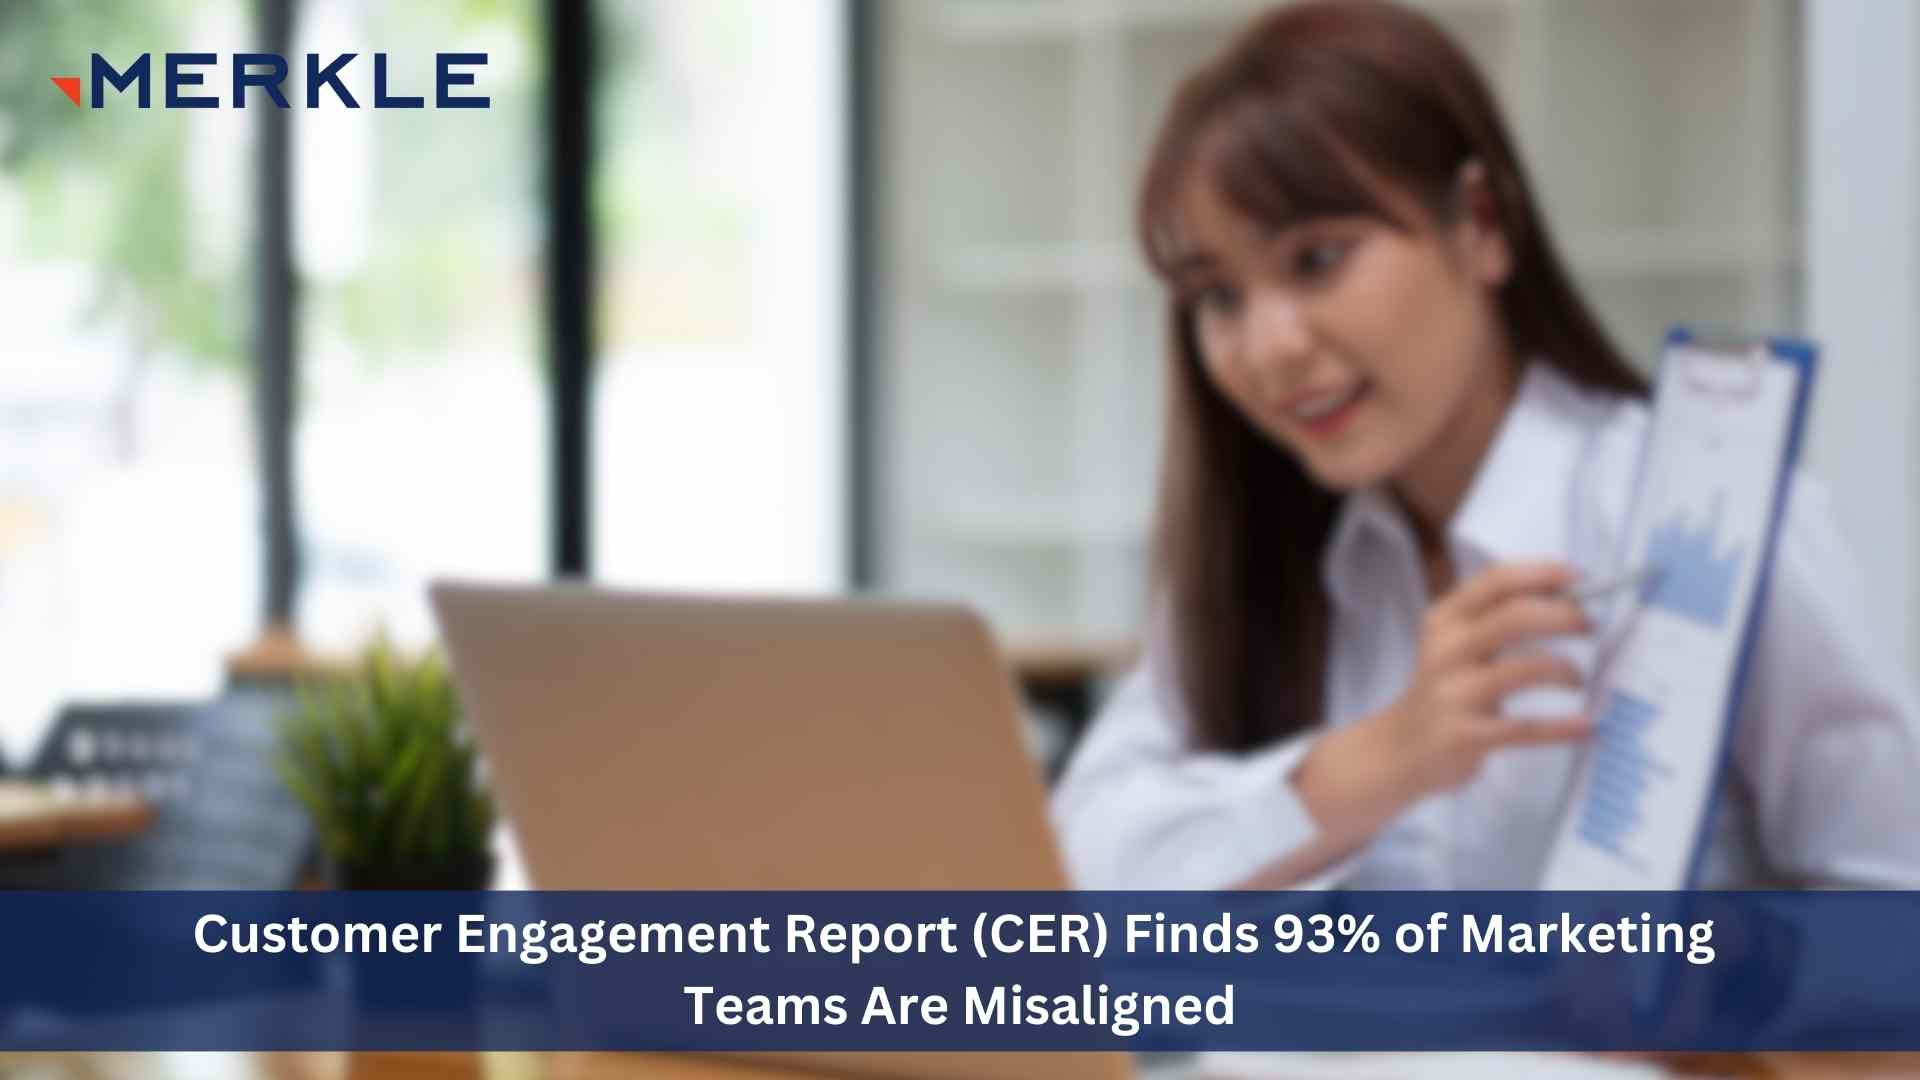 Merkle Customer Engagement Report (CER) Finds 93% of Marketing Teams are Misaligned on Technology Use, Offers Guidance for Better Collaboration & Efficiency